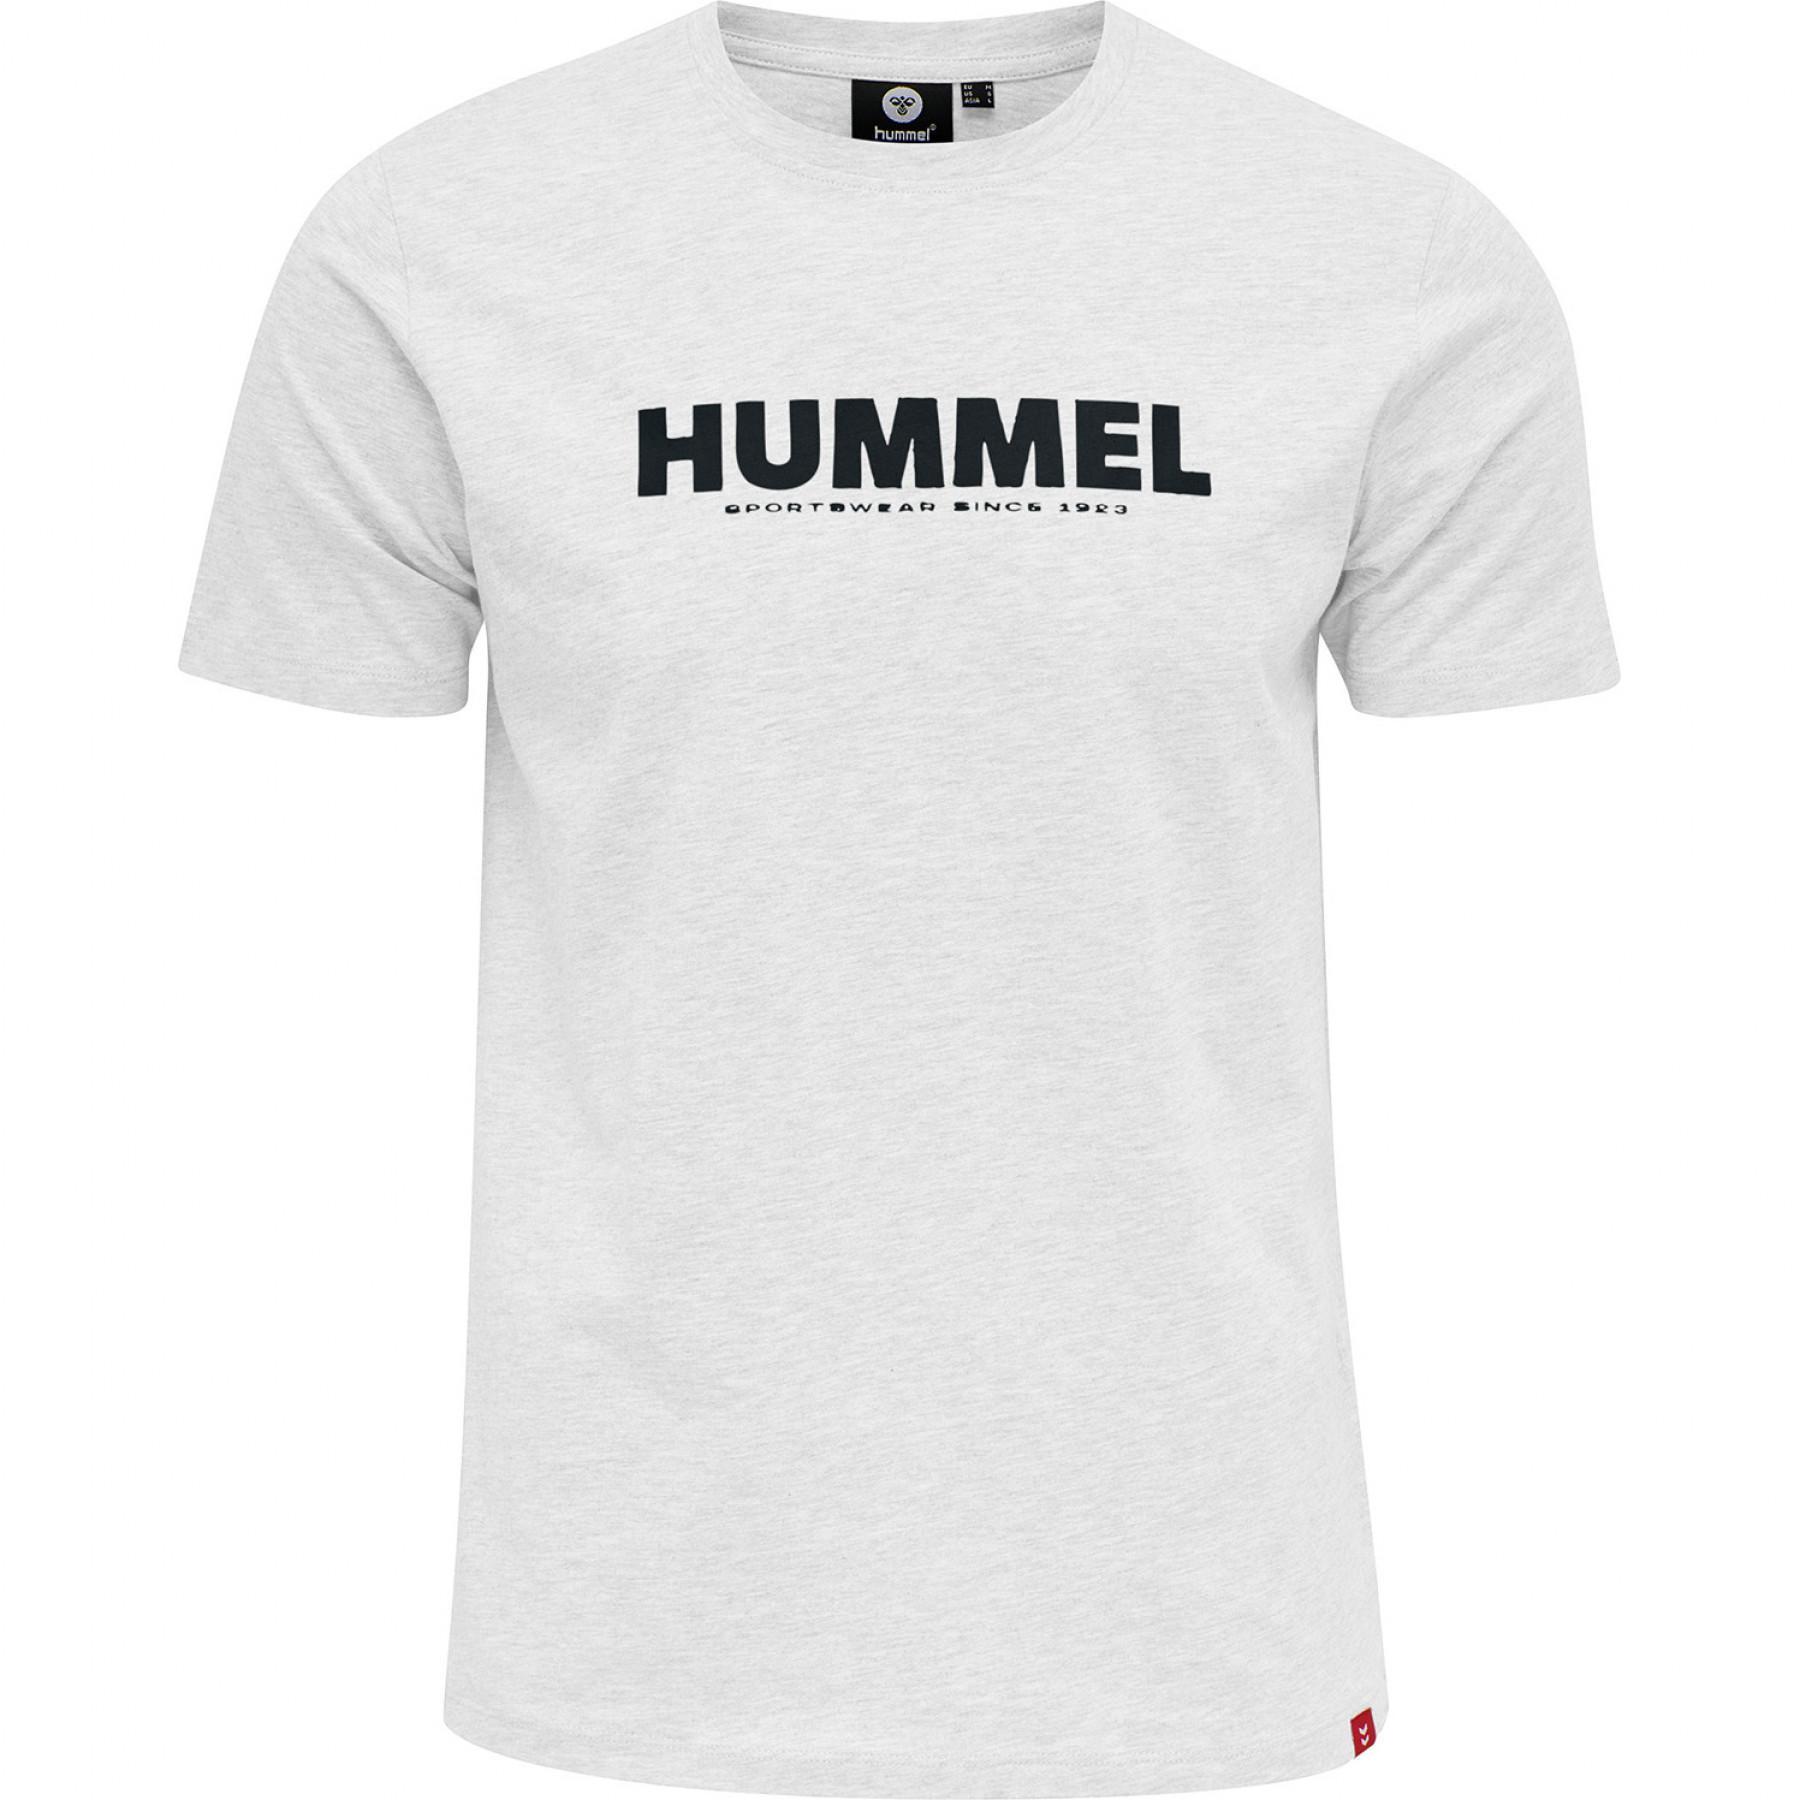 T-shirt Hummel hmllegacy tennis Textile - - T-shirts - and Table polos